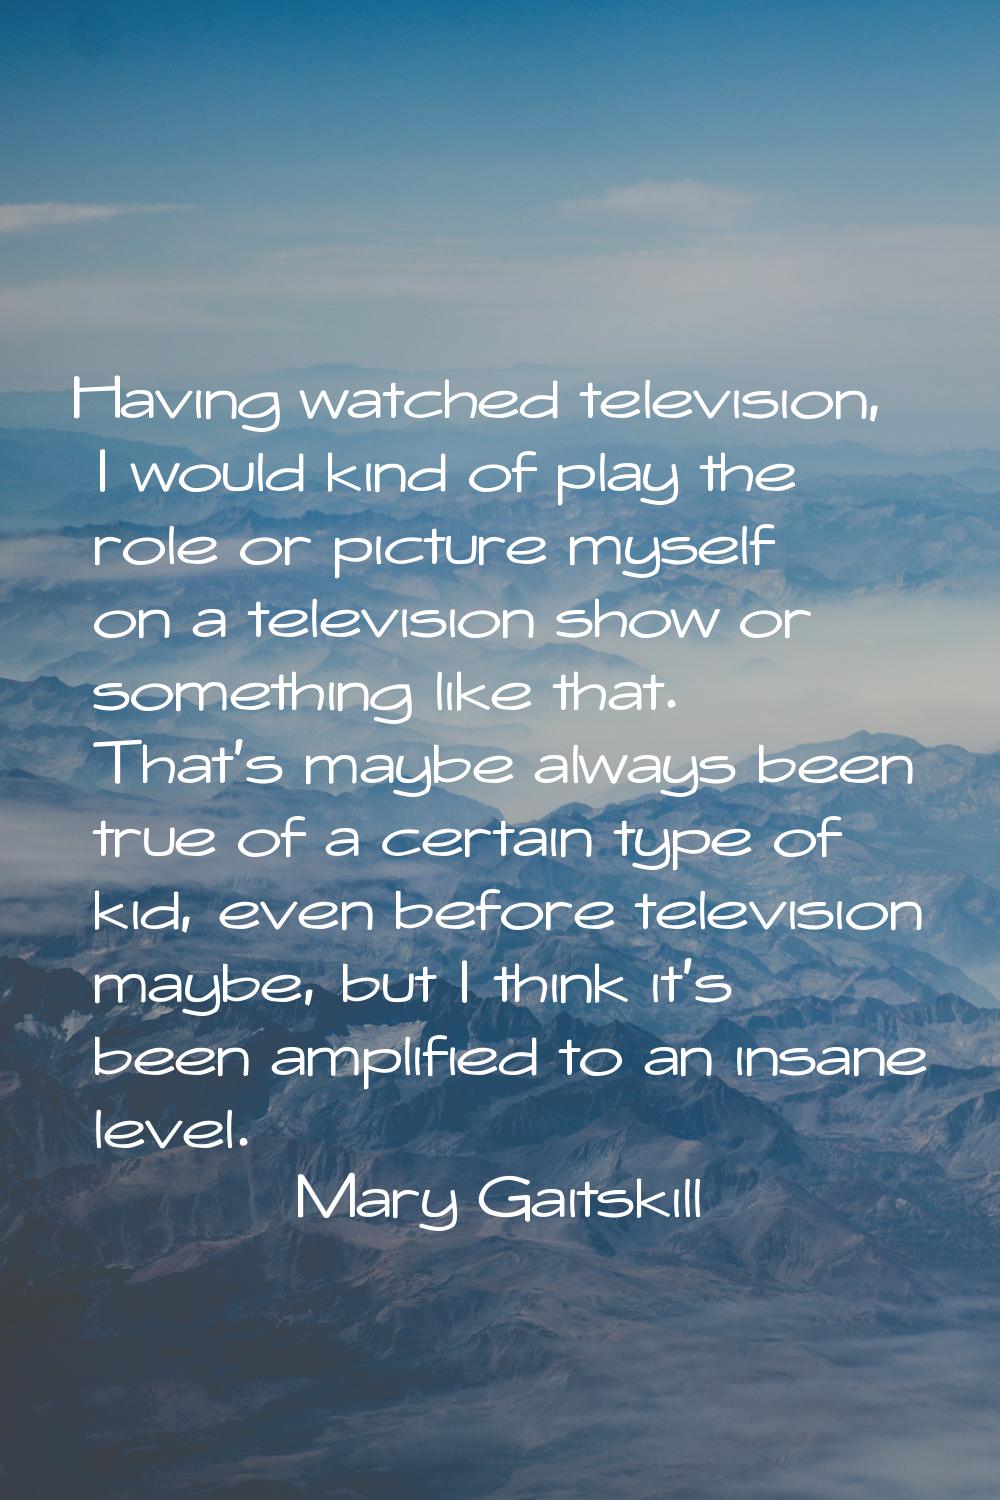 Having watched television, I would kind of play the role or picture myself on a television show or 